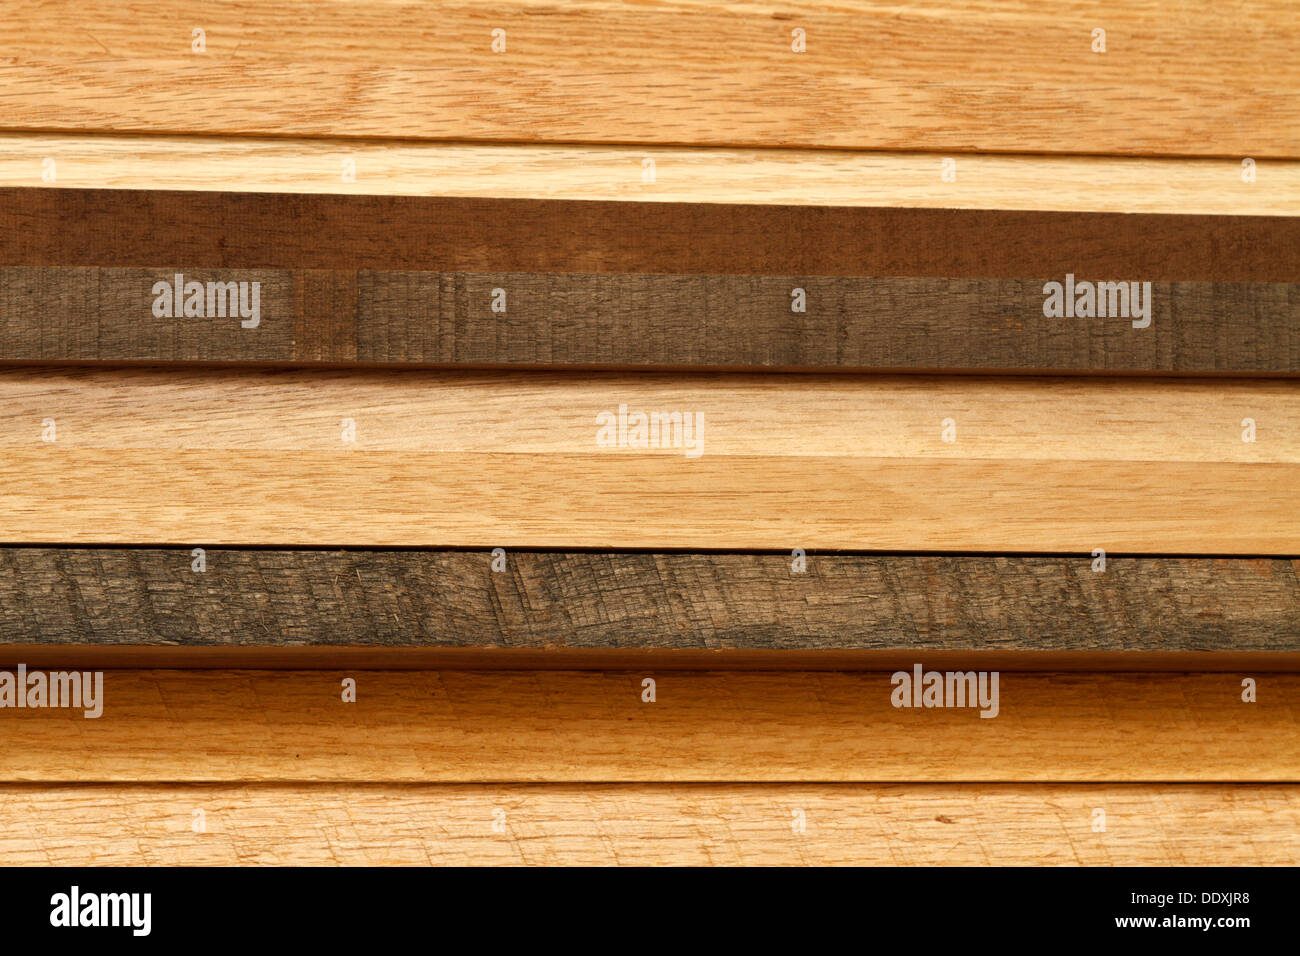 Close-up of various boards of lumber stacked from the side. Most of the lumber is oak wood in various stages of age & weathering Stock Photo